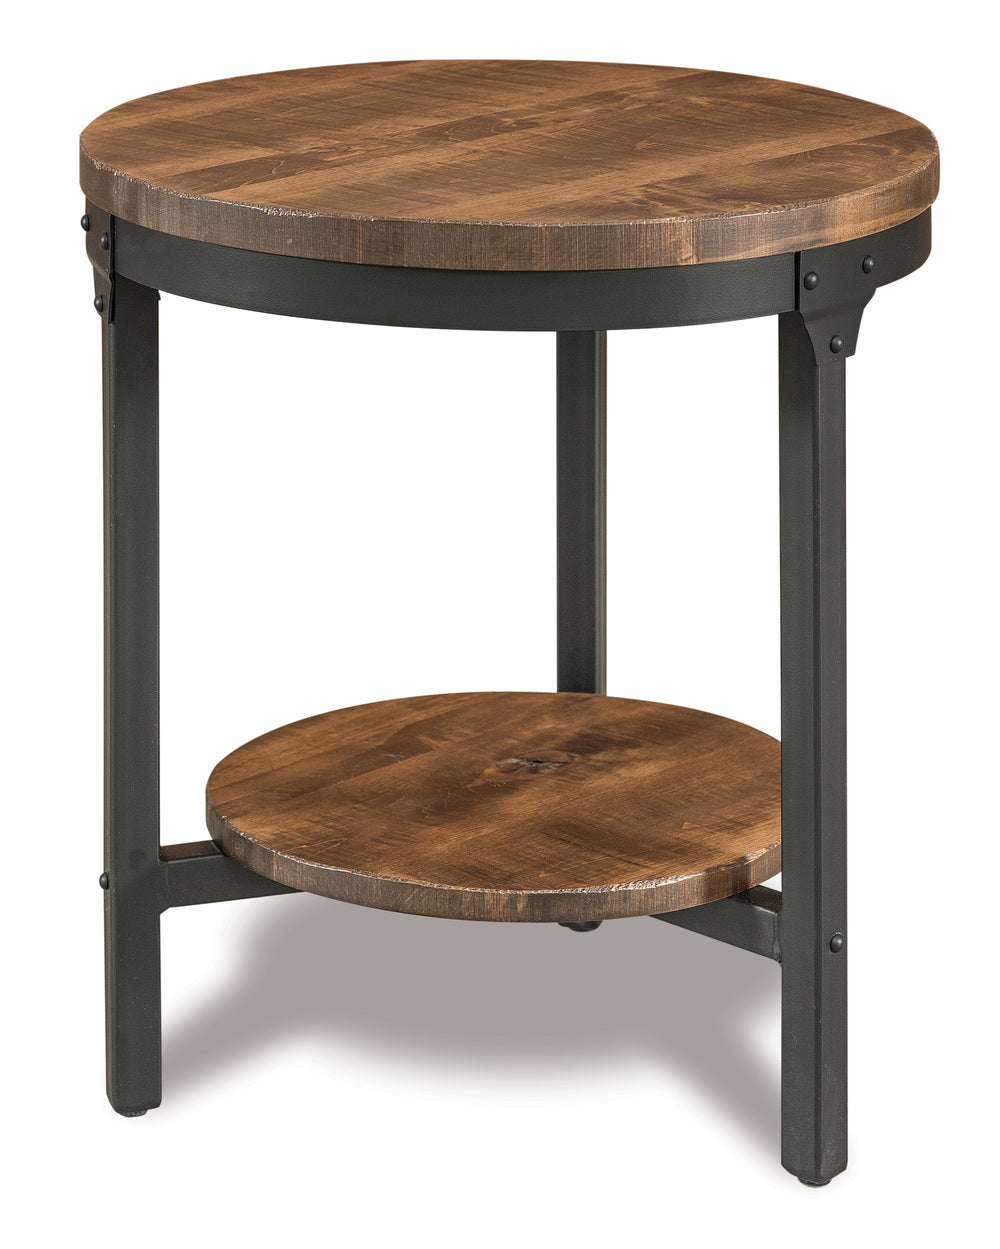 Amish Houston 22" Round Steel and Wood End Table with Shelf